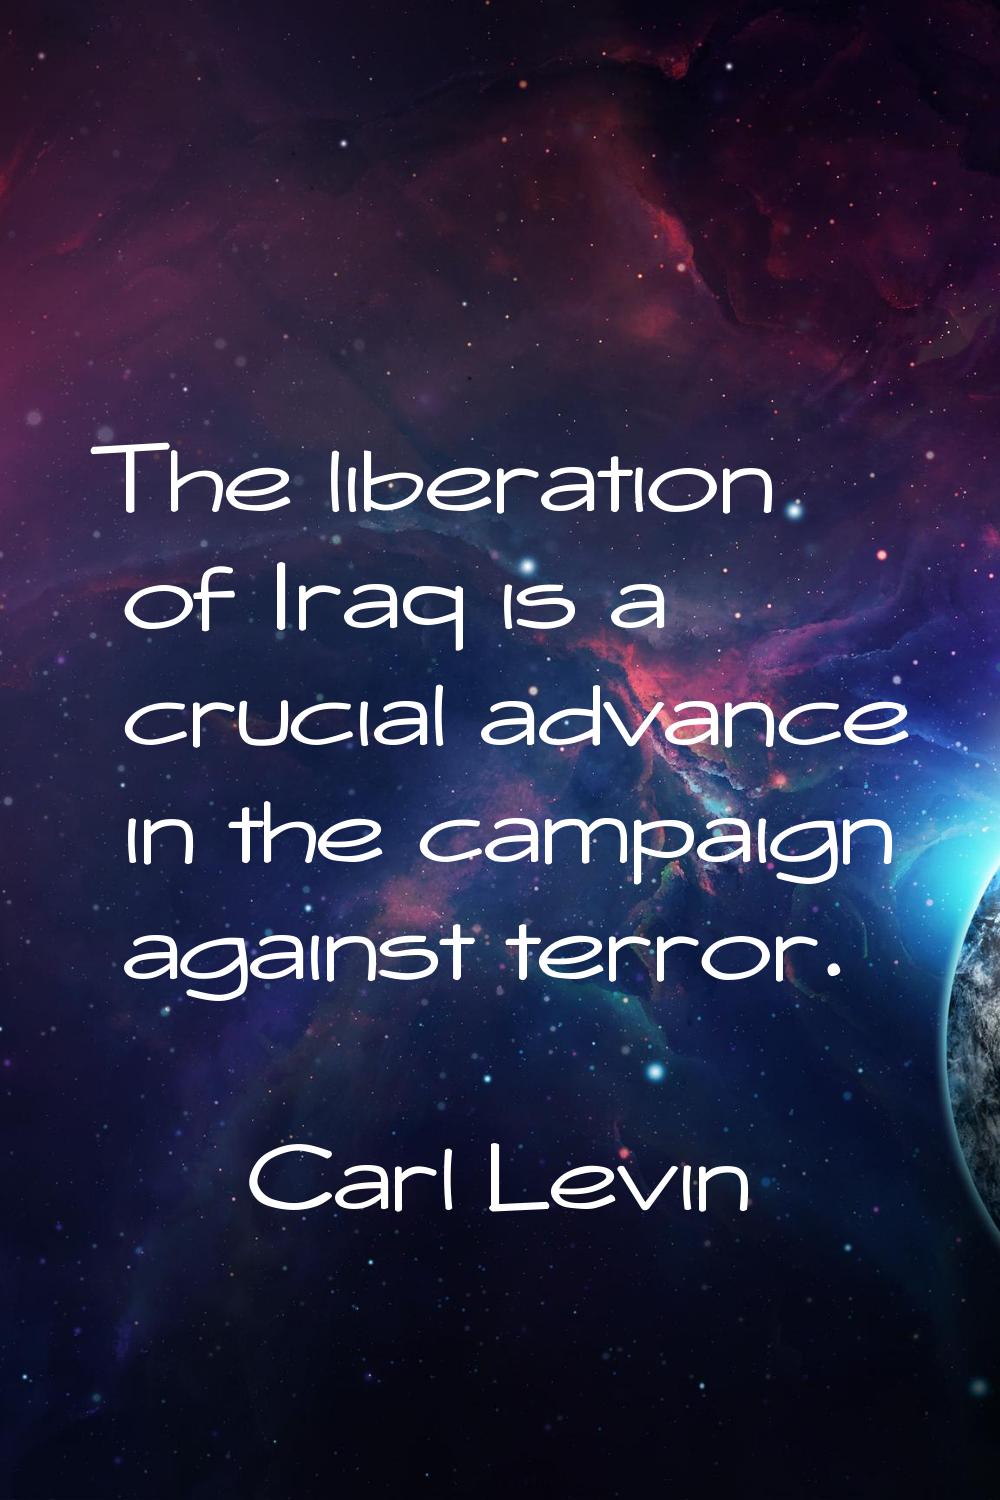 The liberation of Iraq is a crucial advance in the campaign against terror.